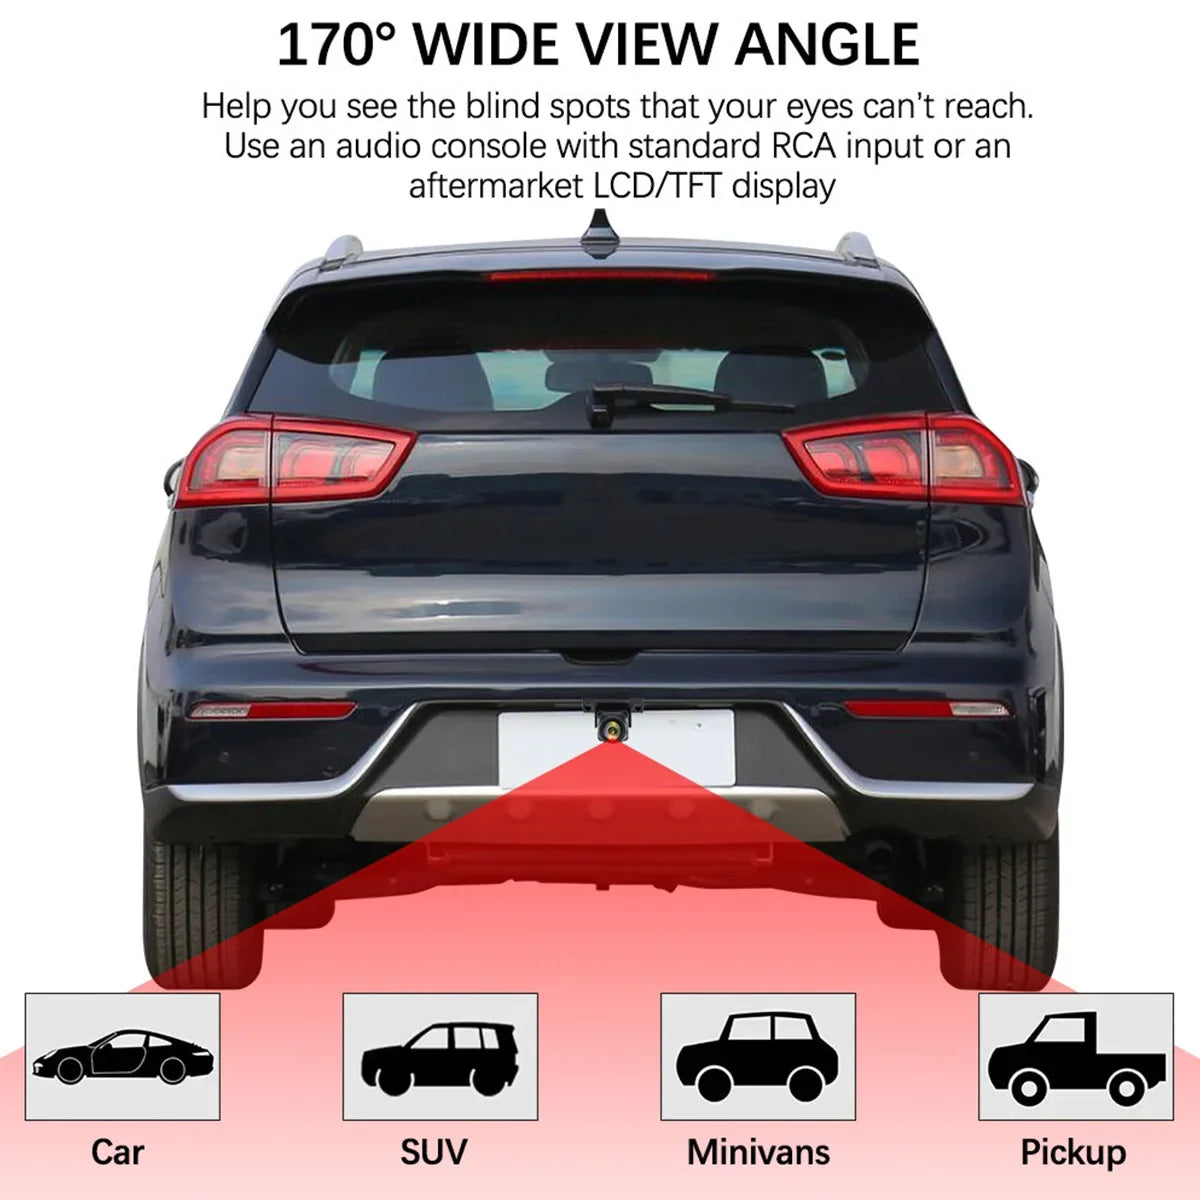 1080P Car Rear View Camera 170° Wide Angle Adjustable Anti-Interference Night Vision Waterproof Auto Parking Backup Camera New